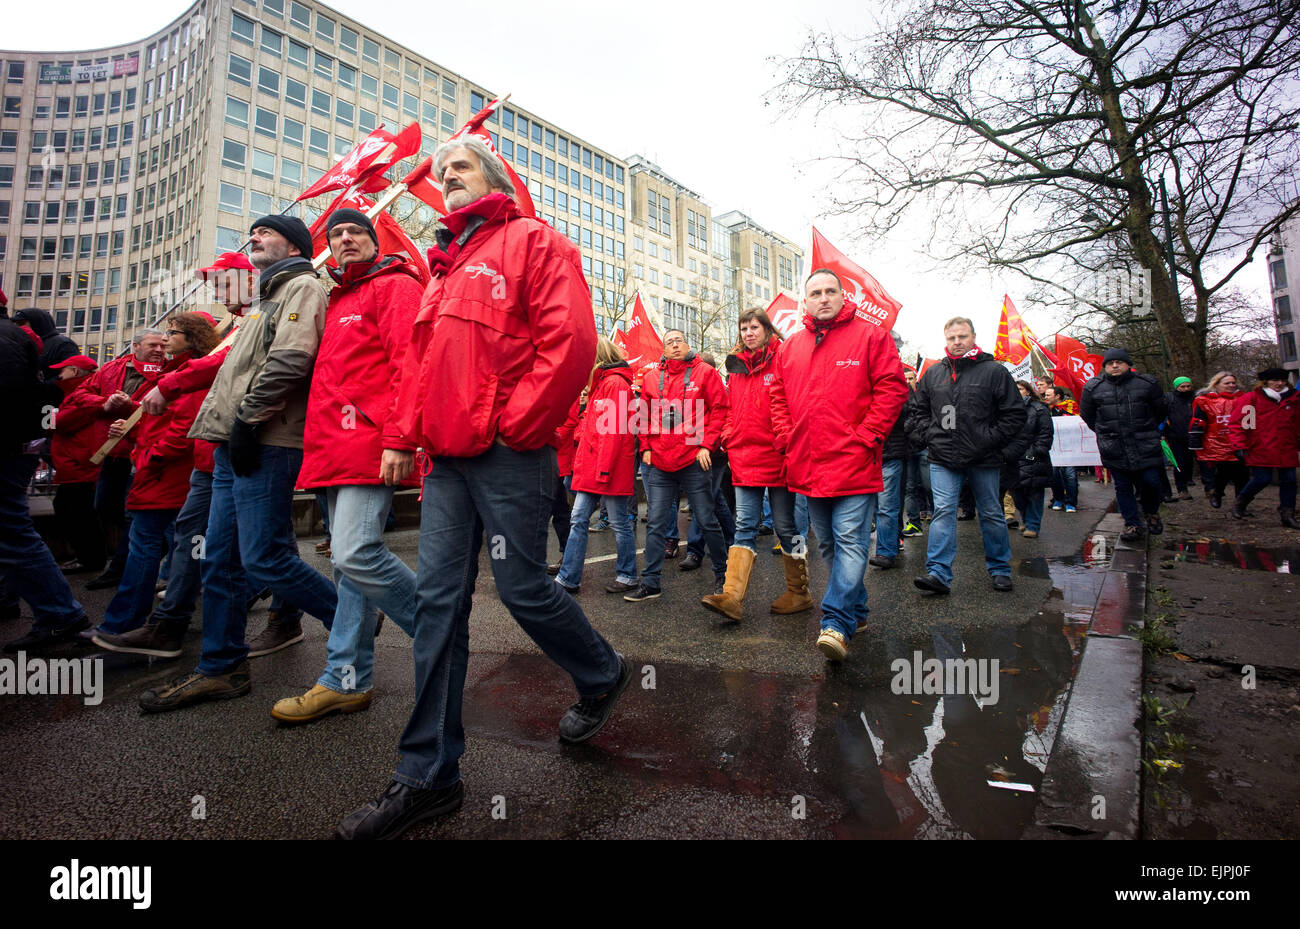 Brussels, Belgium. 30th Mar, 2015. Thousands took part in anti austerity demonstration organized by multiple workers' unions and political parties. Clash broke out as members of 'LCR' (Revolutionary Communist League of Belgium) tries to take over the stage. Credit:  Geovien So/Pacific Press/Alamy Live News Stock Photo